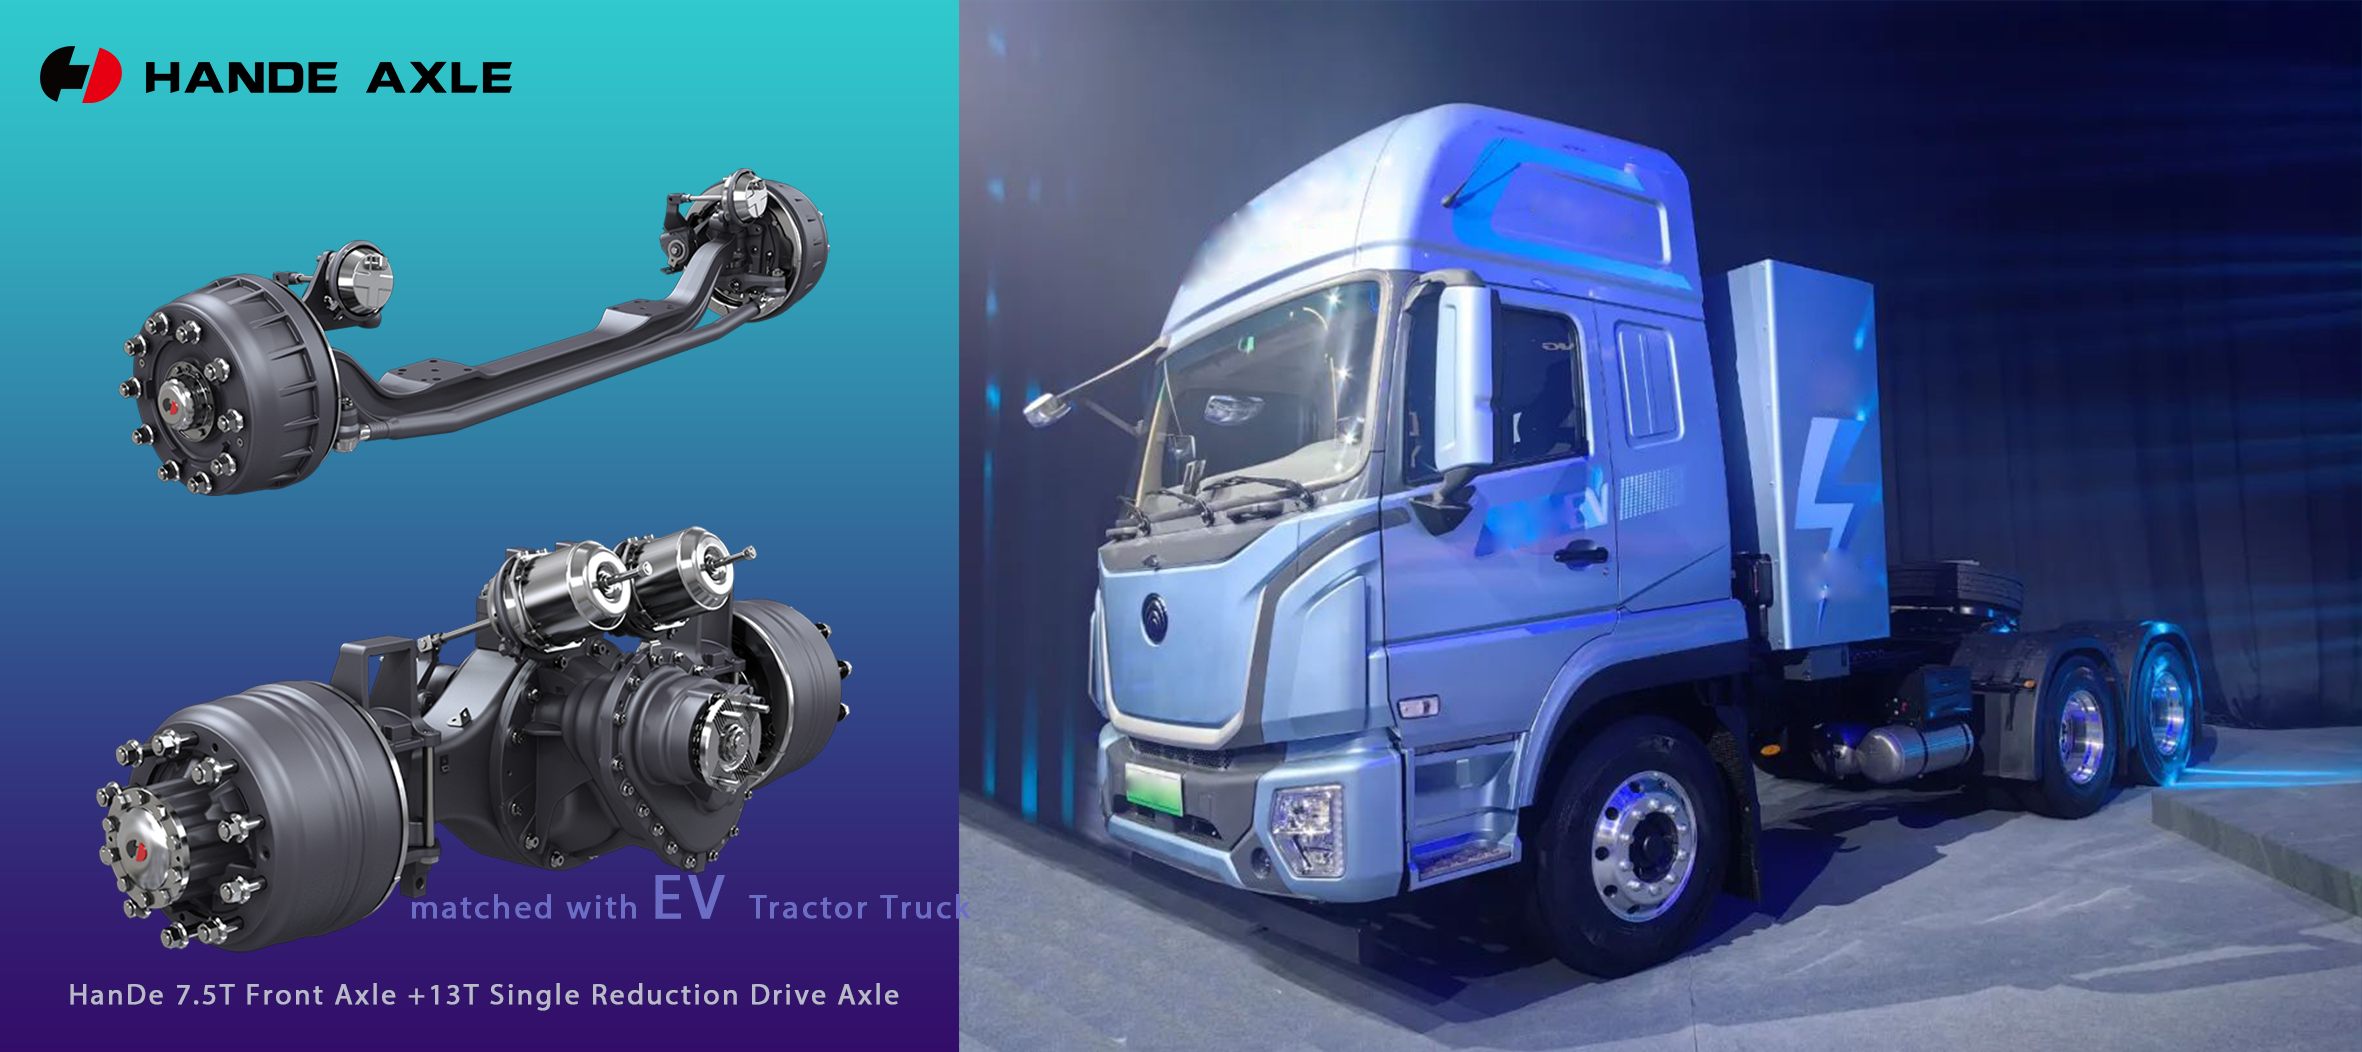 EV tractor truck apply with HanDe 7.5T Front Axle + 13T Single Reduction Drive Axle